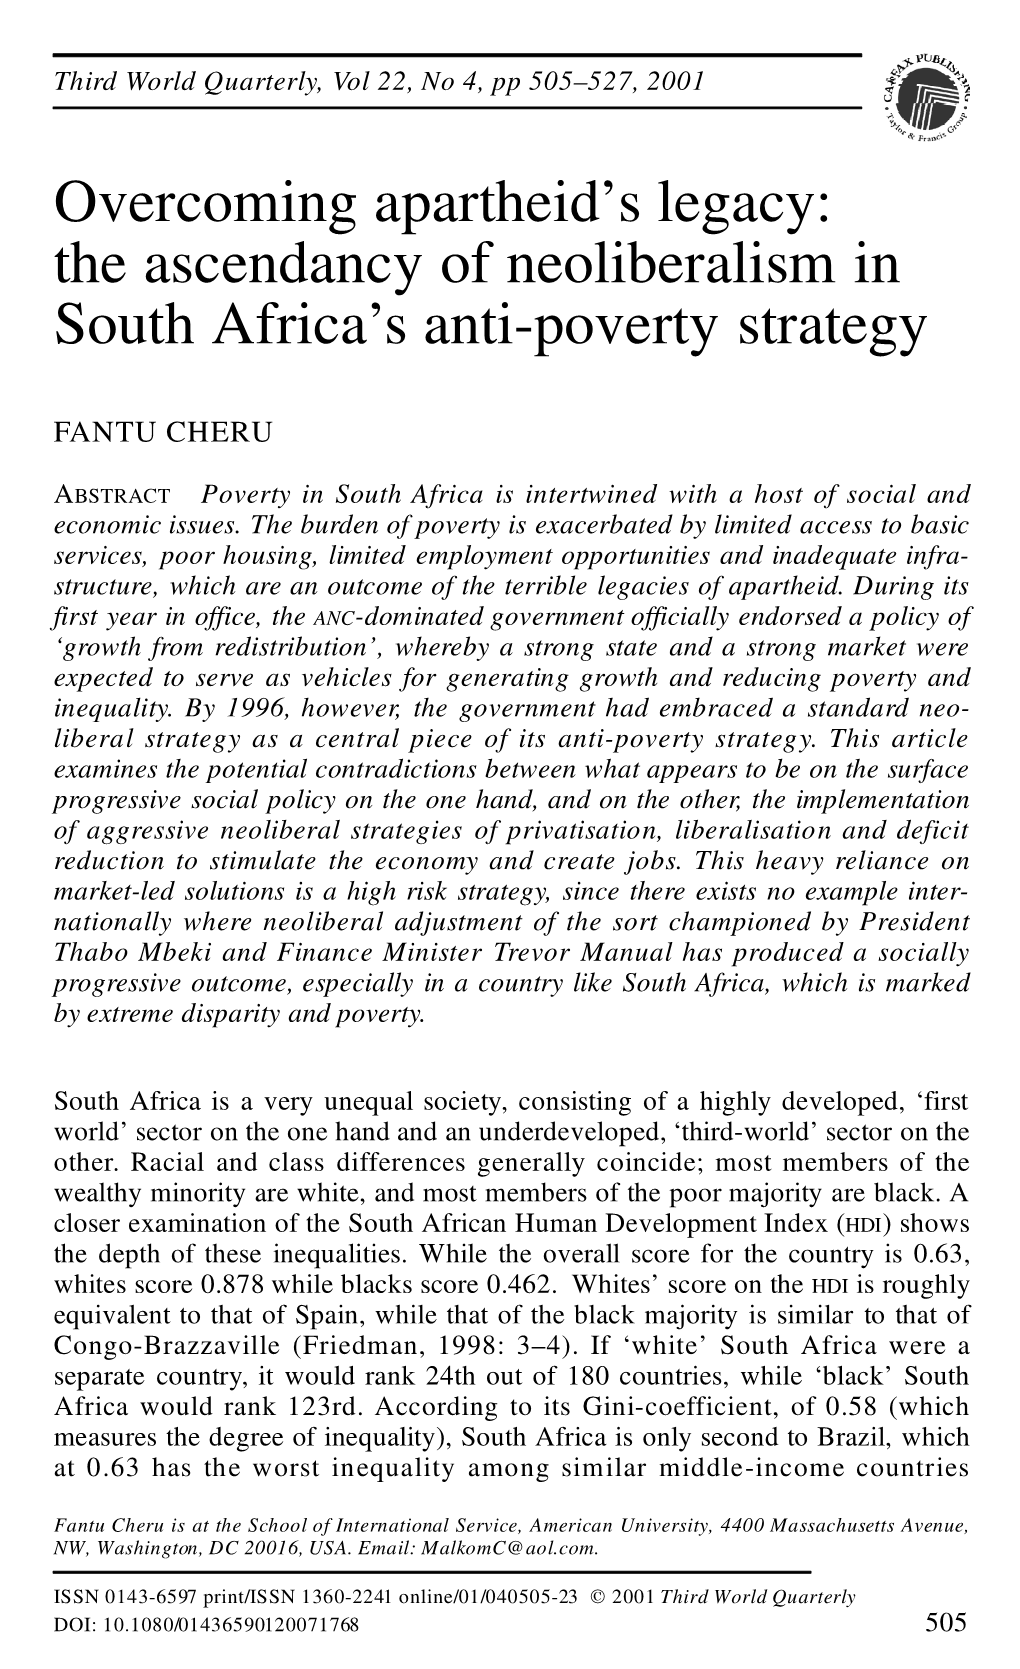 The Ascendancy of Neoliberalism in South Africa's Anti-Poverty Strategy